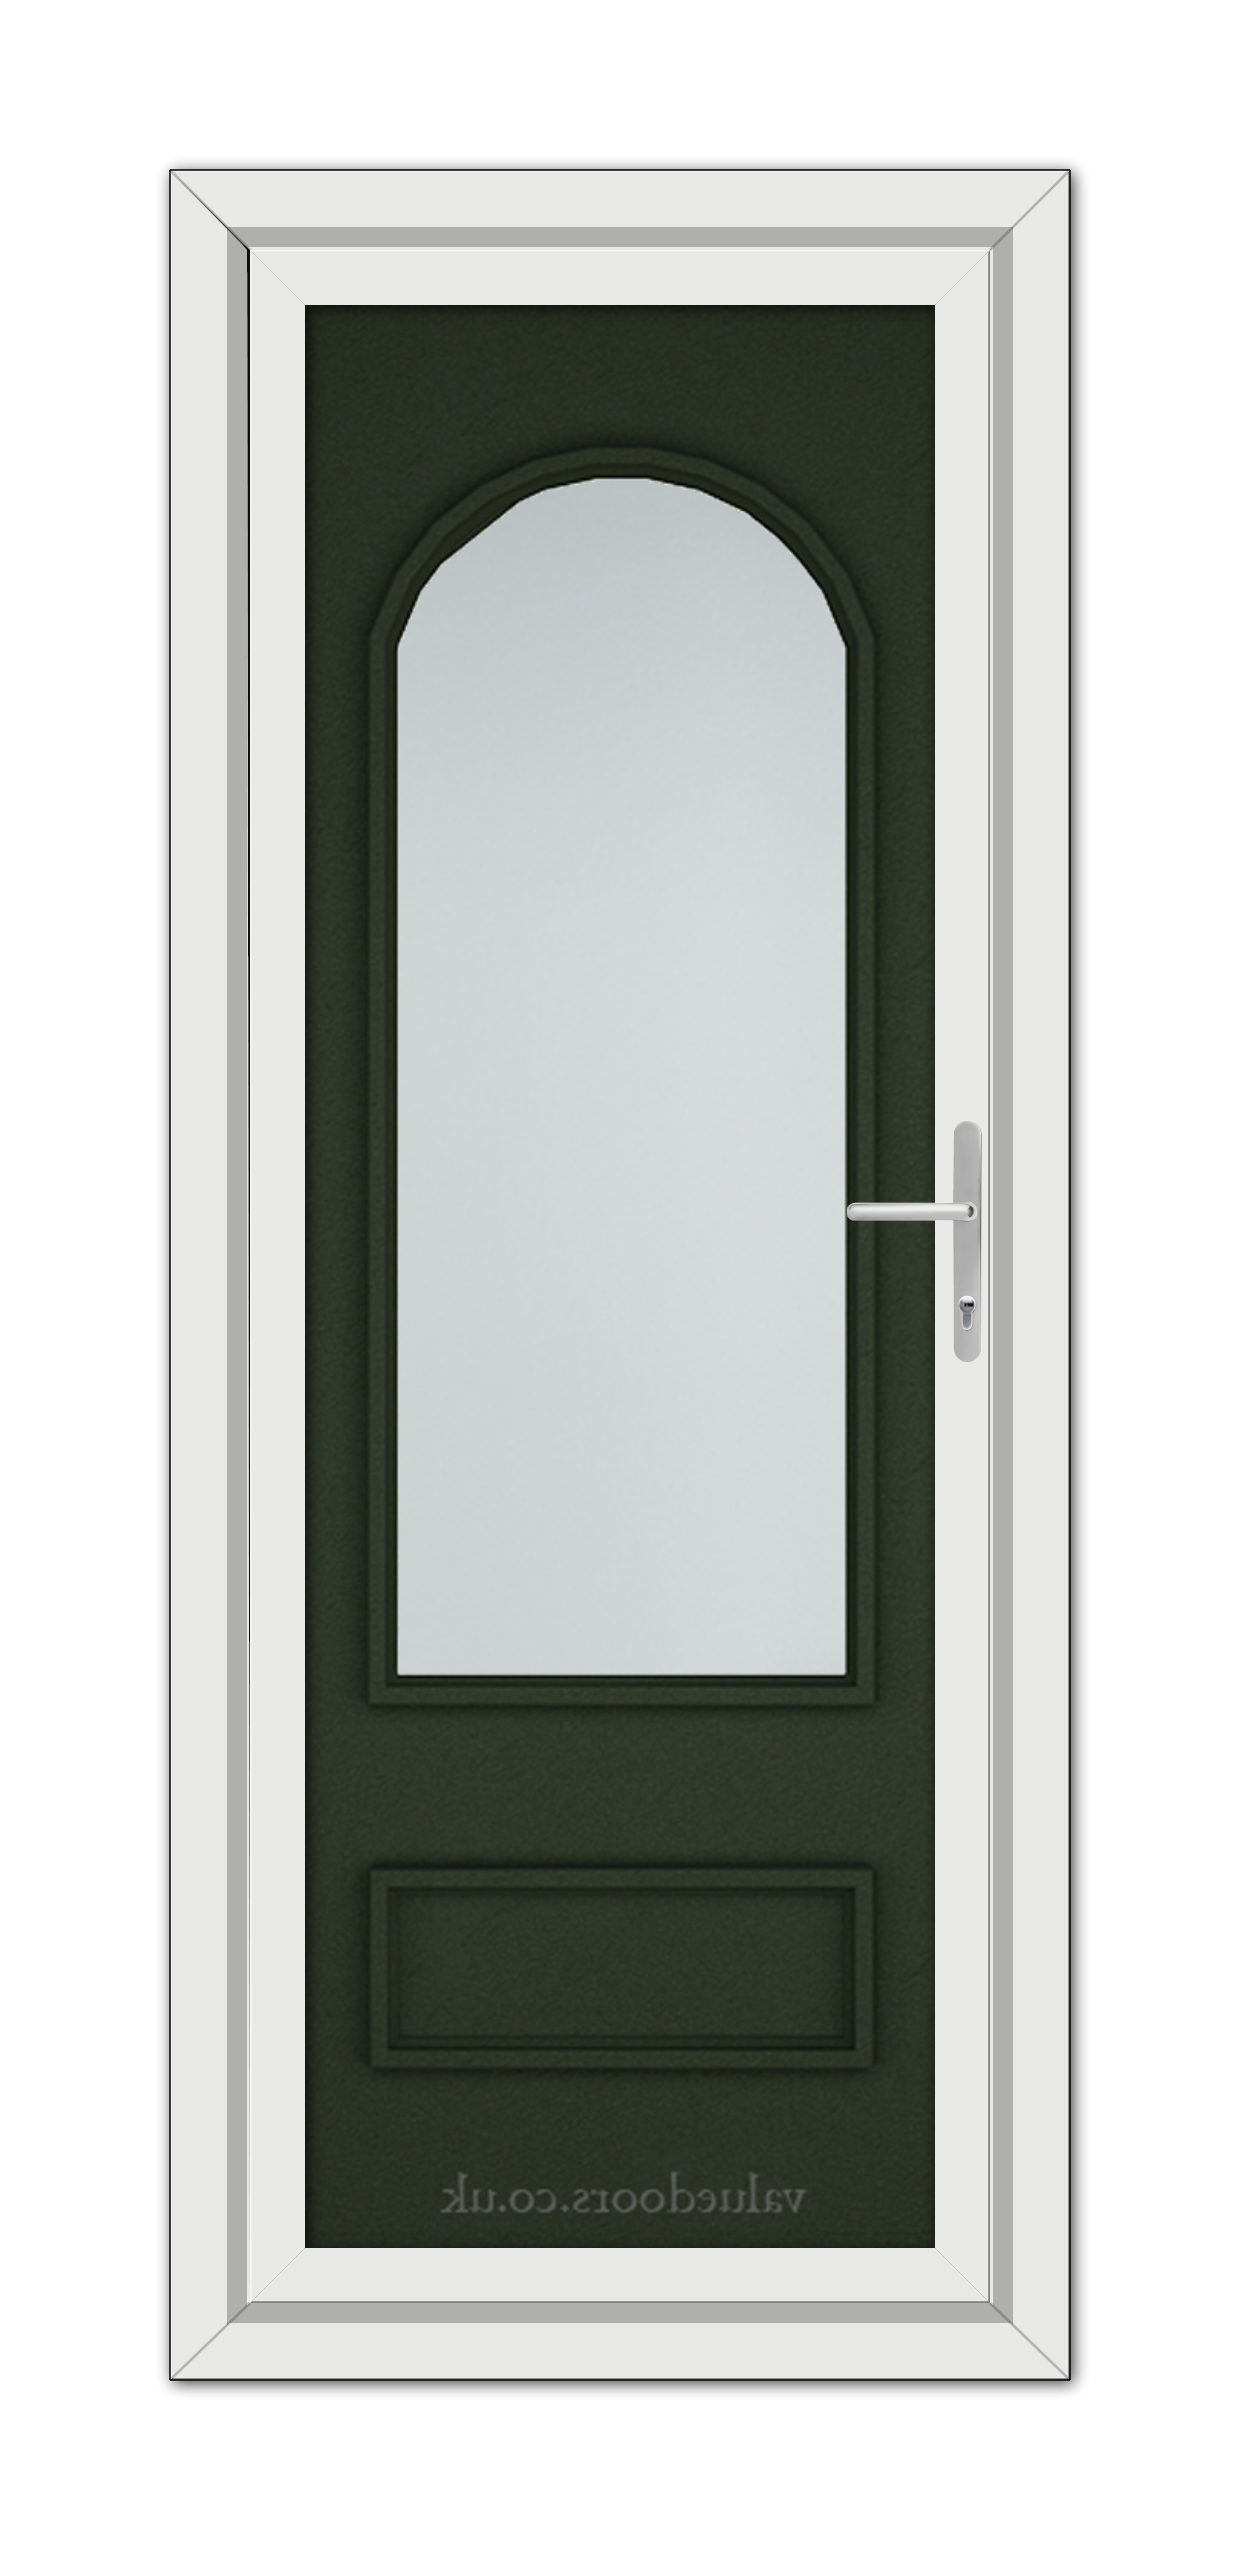 A vertical rectangular closed Green Canterbury uPVC door with a white frame, featuring a dark green panel with a centered arched window and a white door handle on the right.